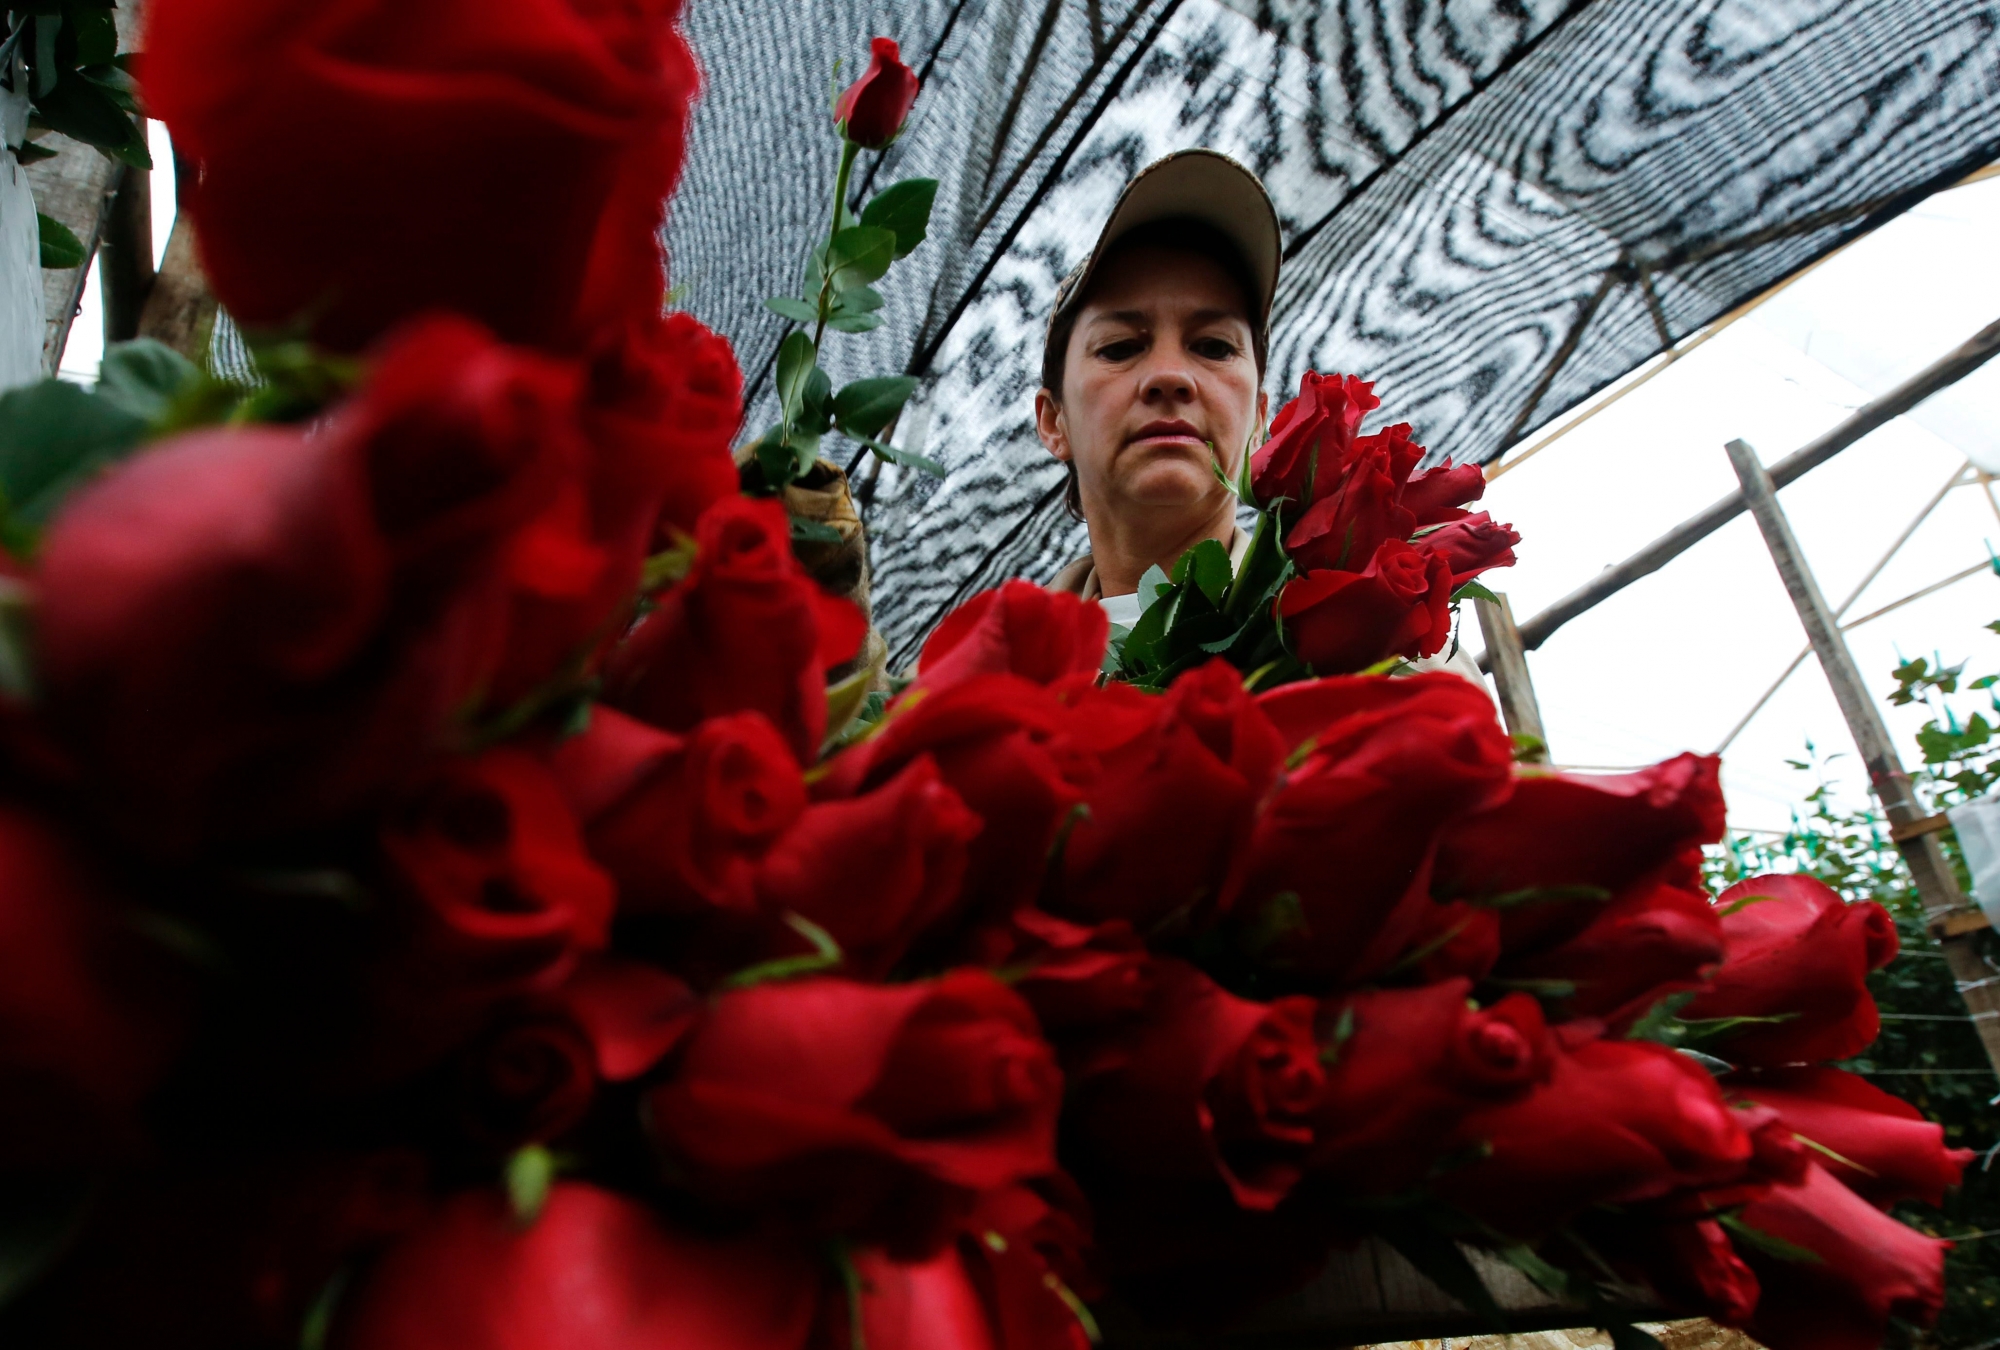 In this Jan. 20, 2017 photo, a worker packs rose buds to be shipped to the United States ahead of Valentine's Day, at the Ayura flower company in Tocancipa, north of Bogota, Colombia. The country's flower industry took off in the early 1990s when the U.S. Congress passed a law eliminating tariffs on goods from Andean drug-producing nations in a bid to encourage legal exports instead. (AP Photo/Fernando Vergara) Colombia Valentine Flowers